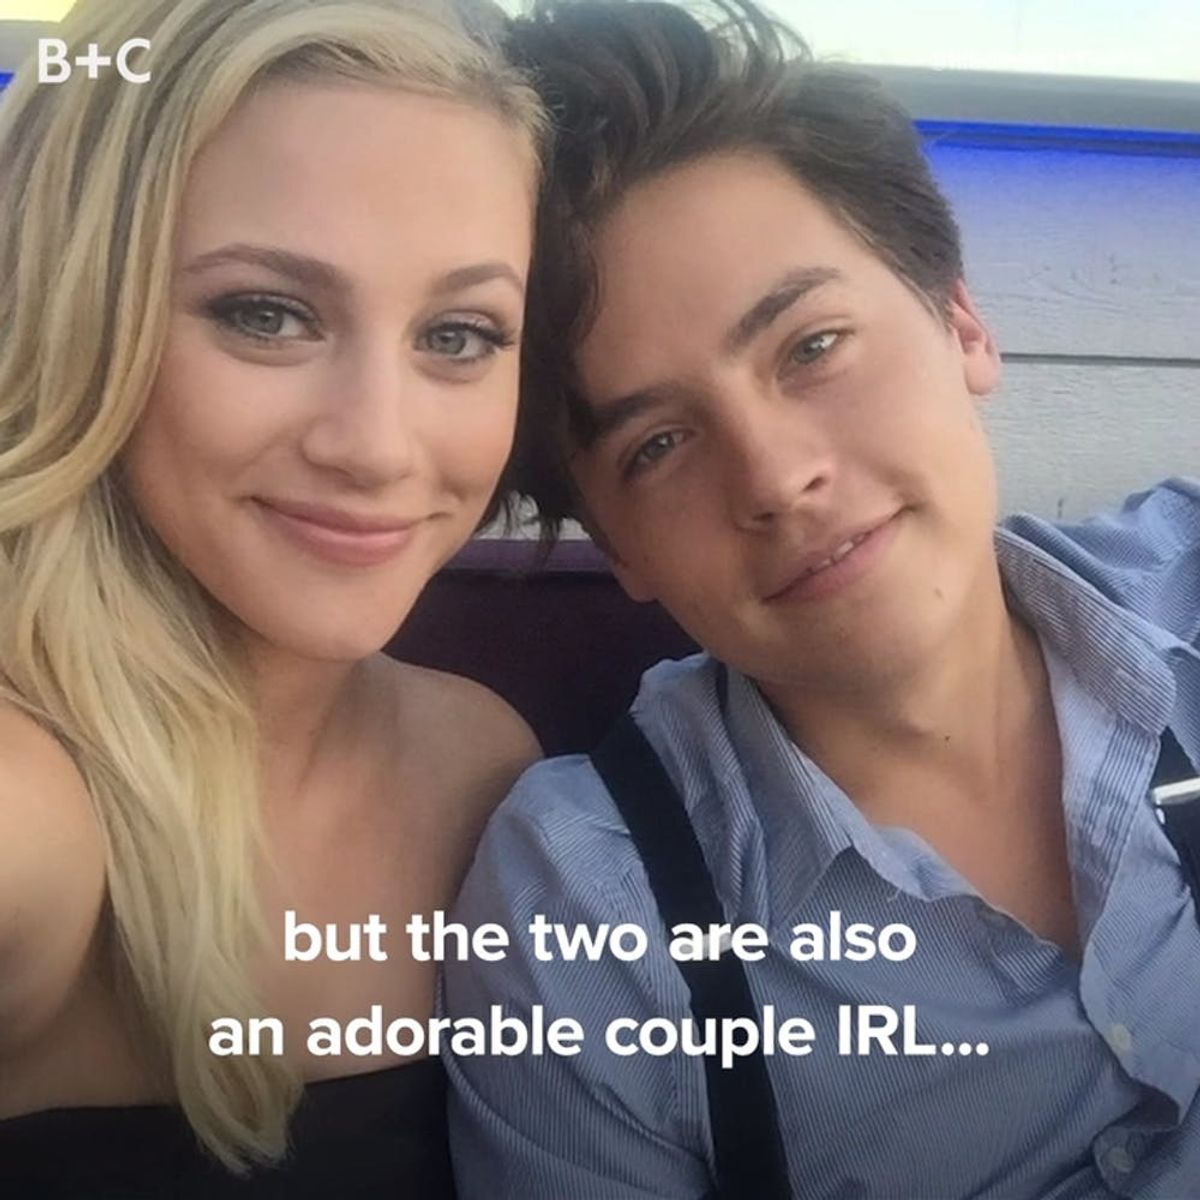 Cole Sprouse and Lili Reinhart Need to DTR Already